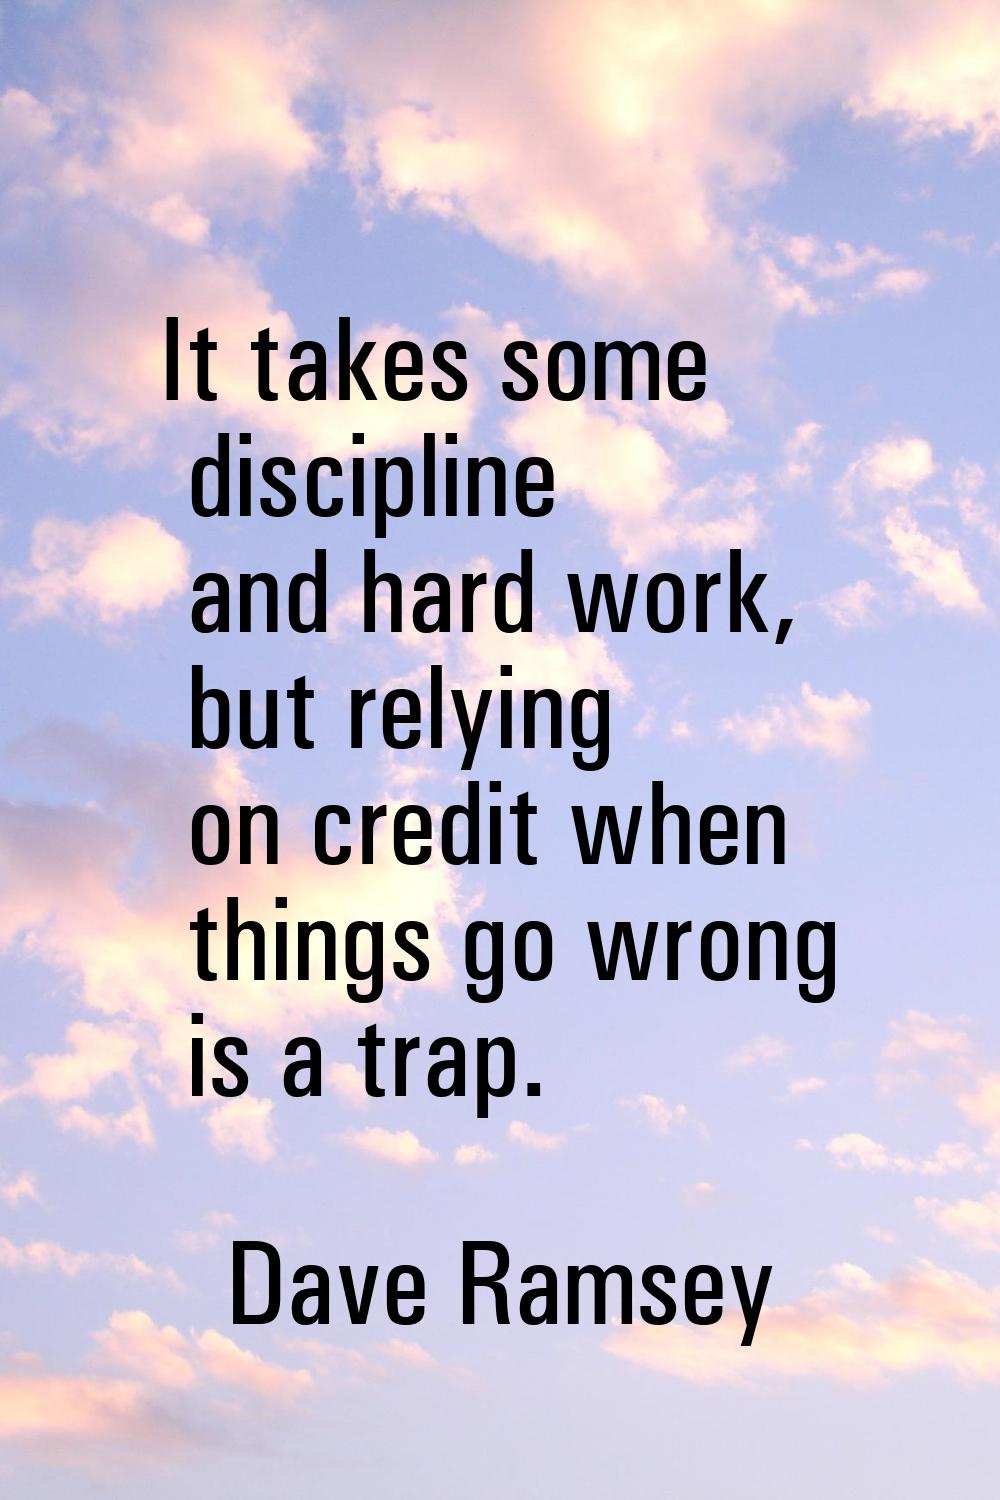 It takes some discipline and hard work, but relying on credit when things go wrong is a trap.